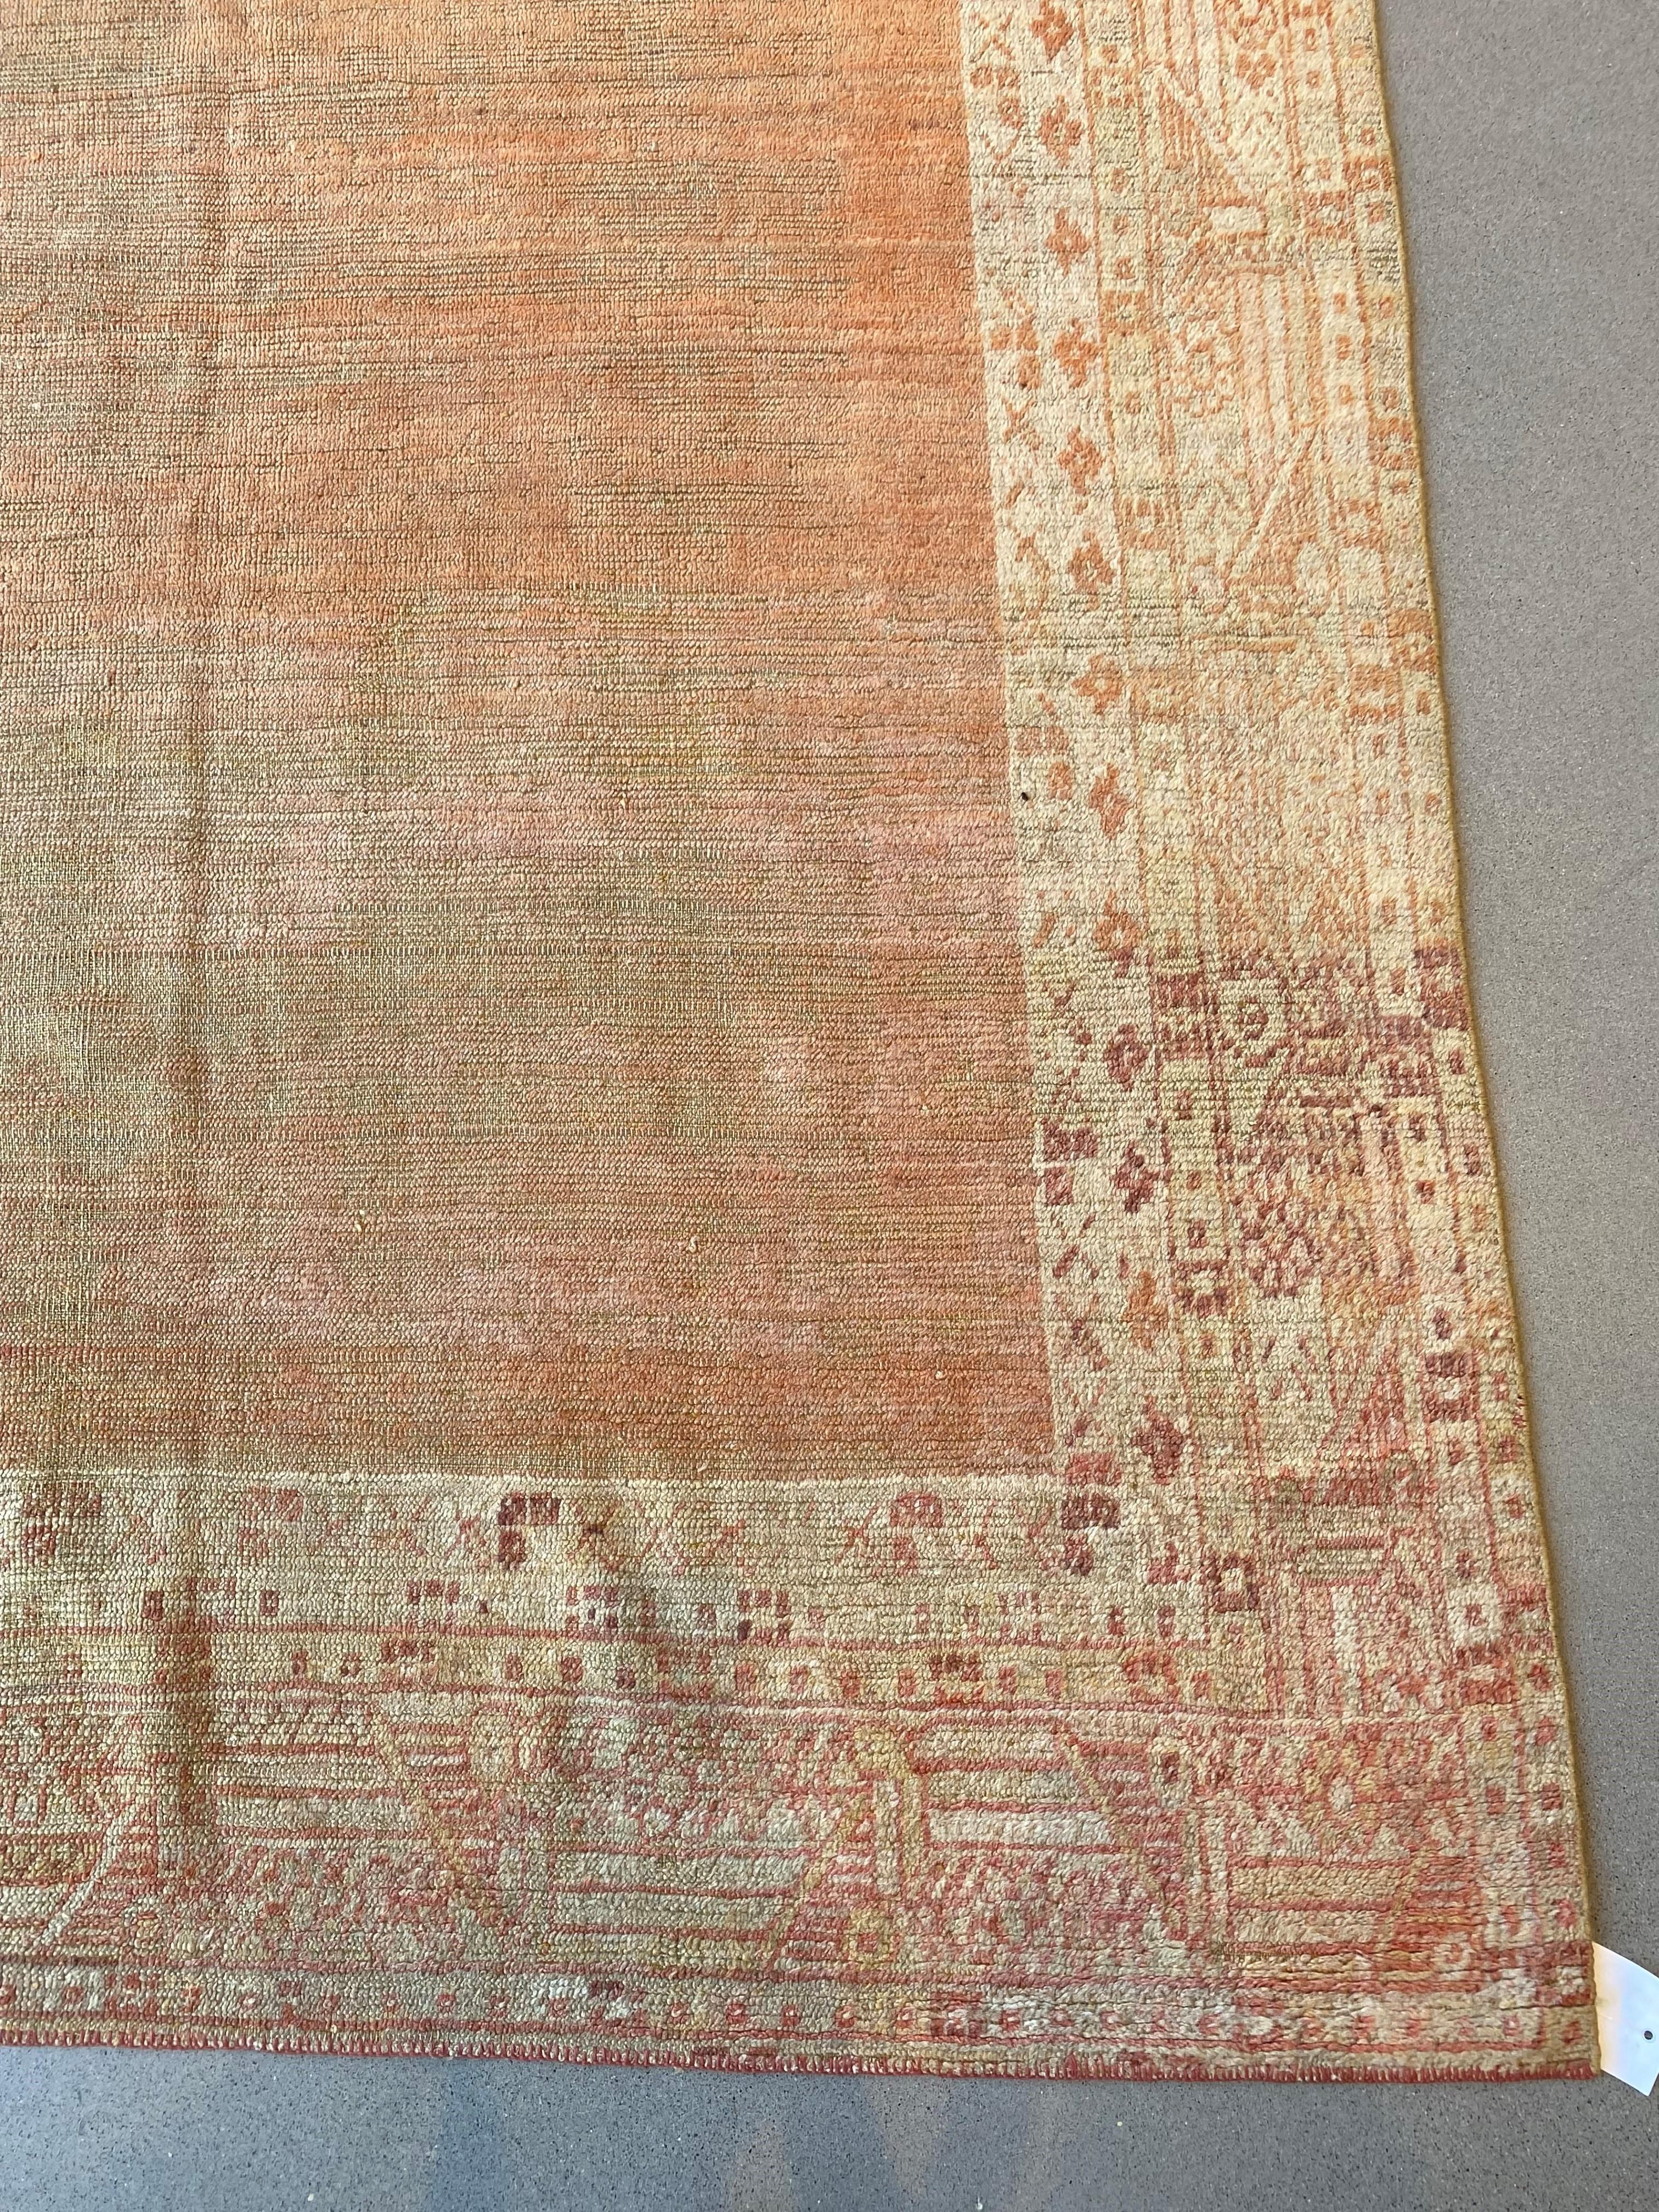 Handwoven Antique Oushak Rug from the Late 19th Century In Good Condition For Sale In West Hollywood, CA